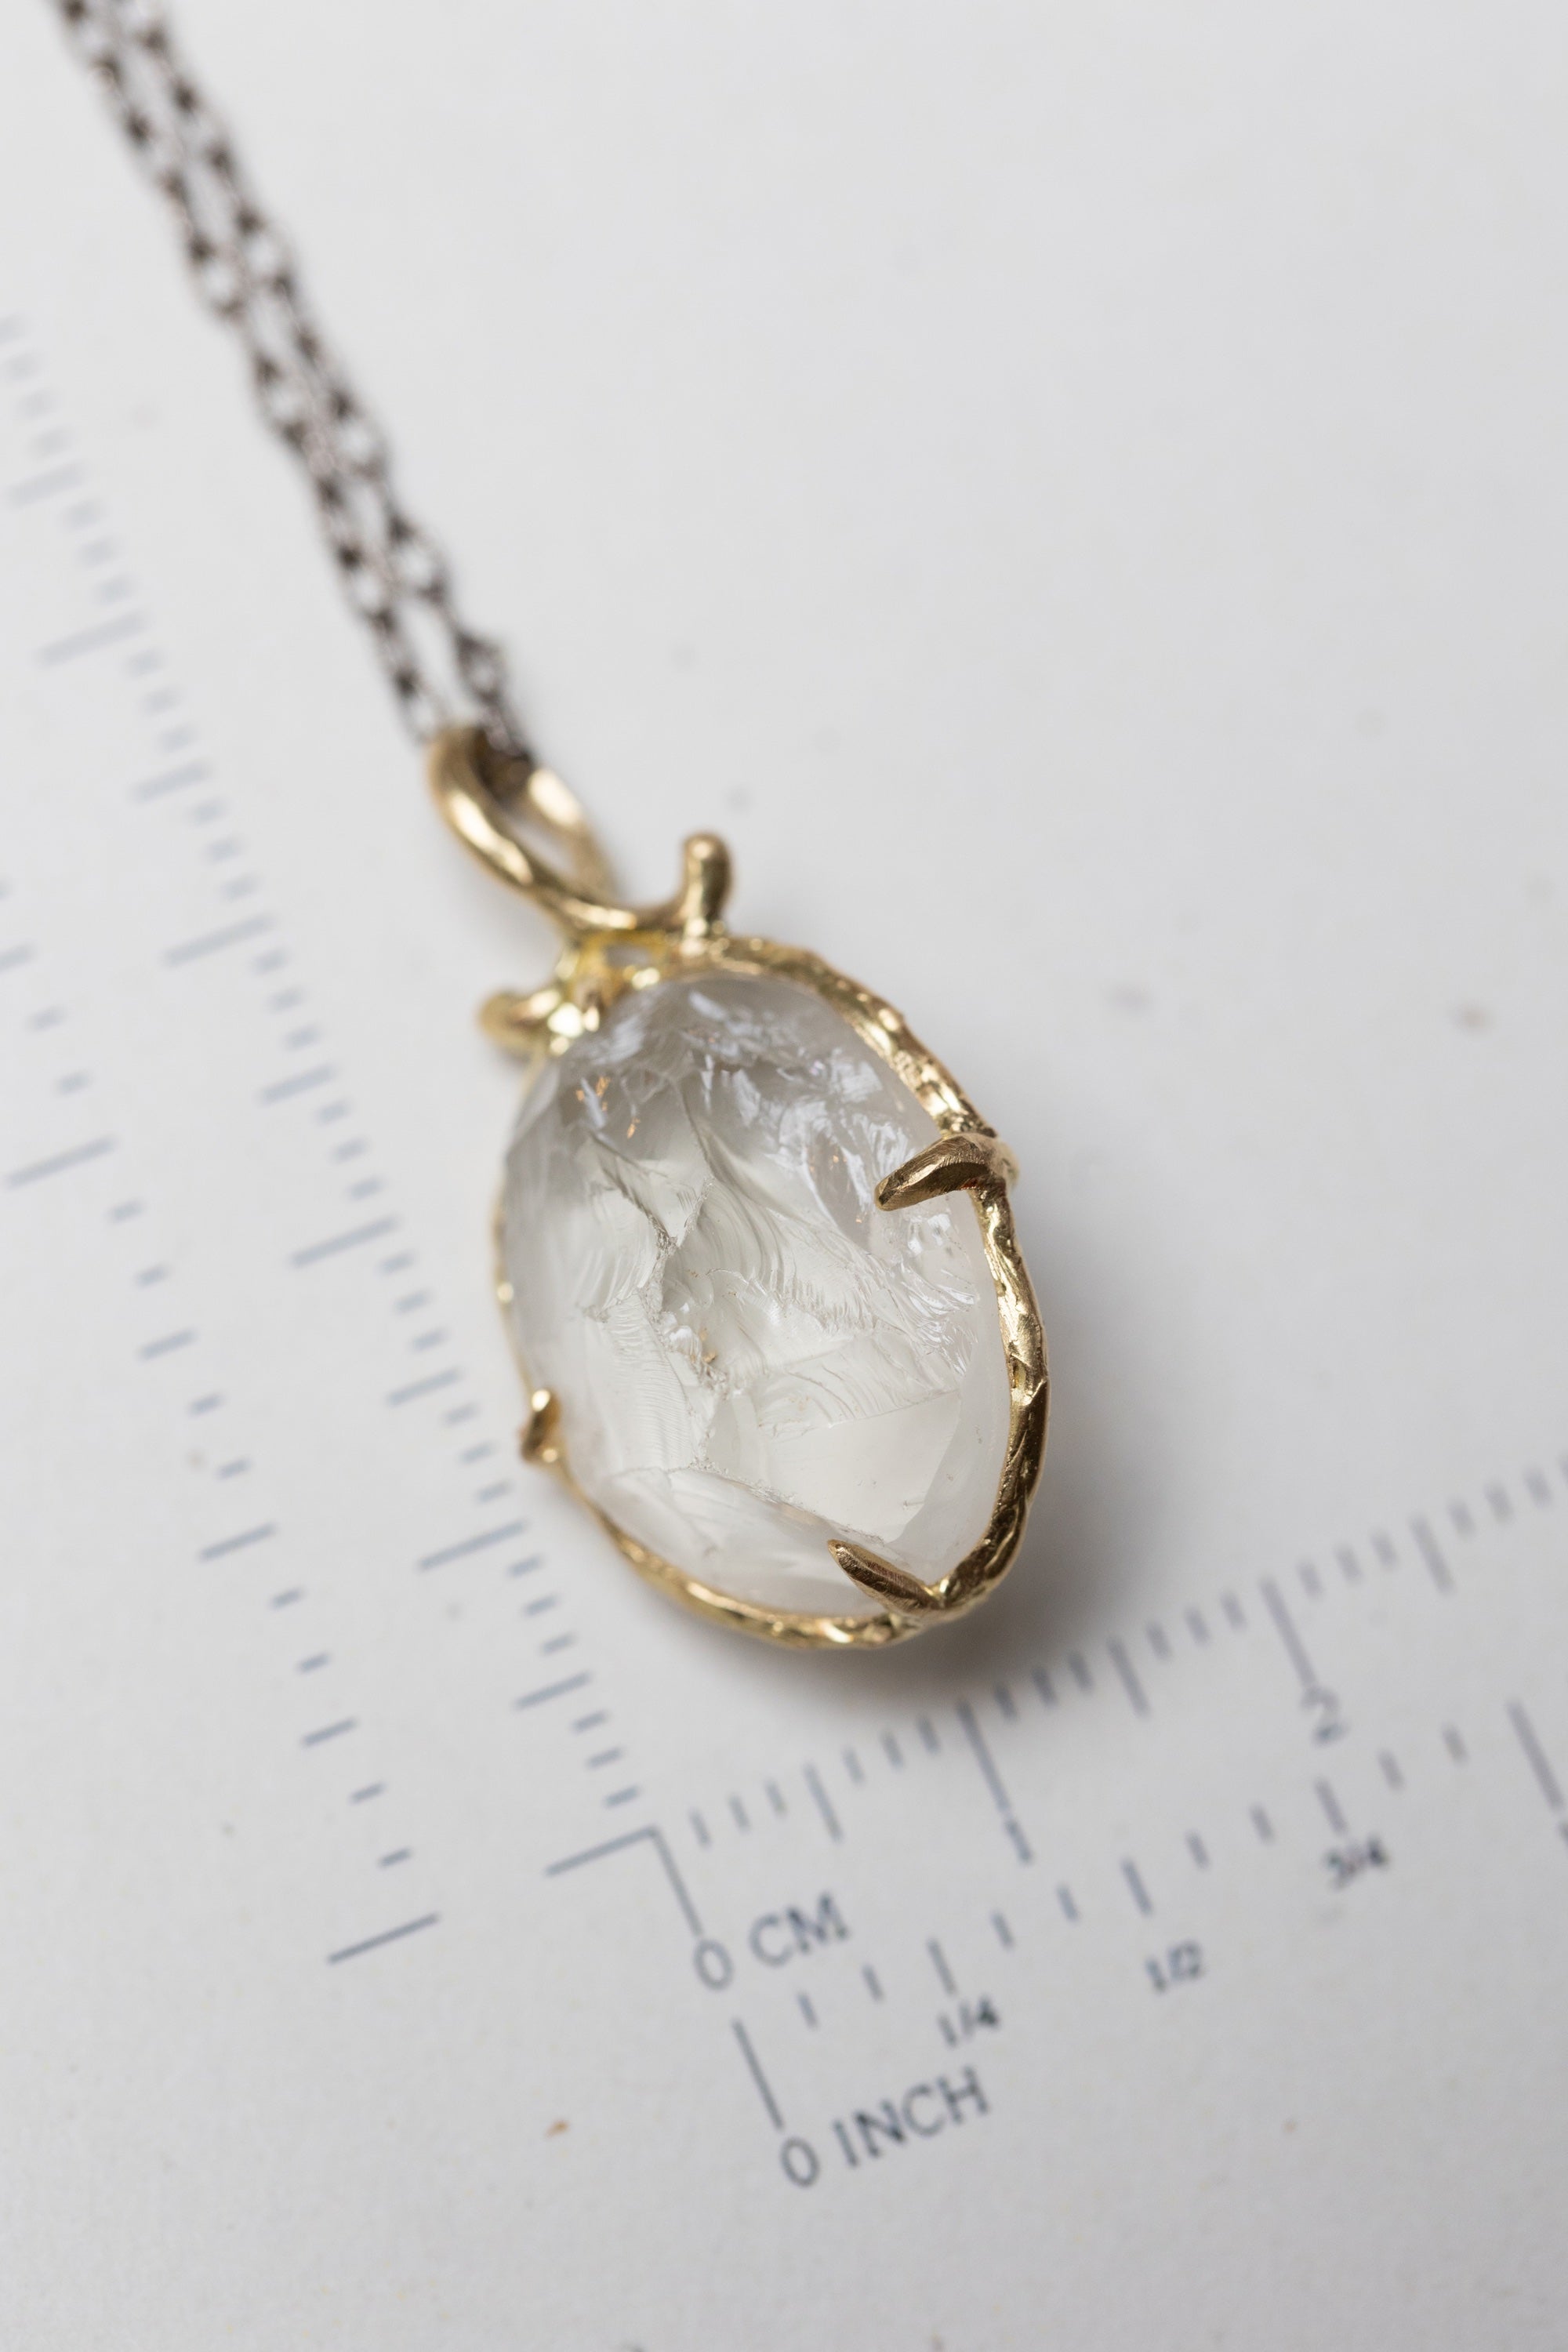 One of a kind Quartz Necklace with Gold Frame